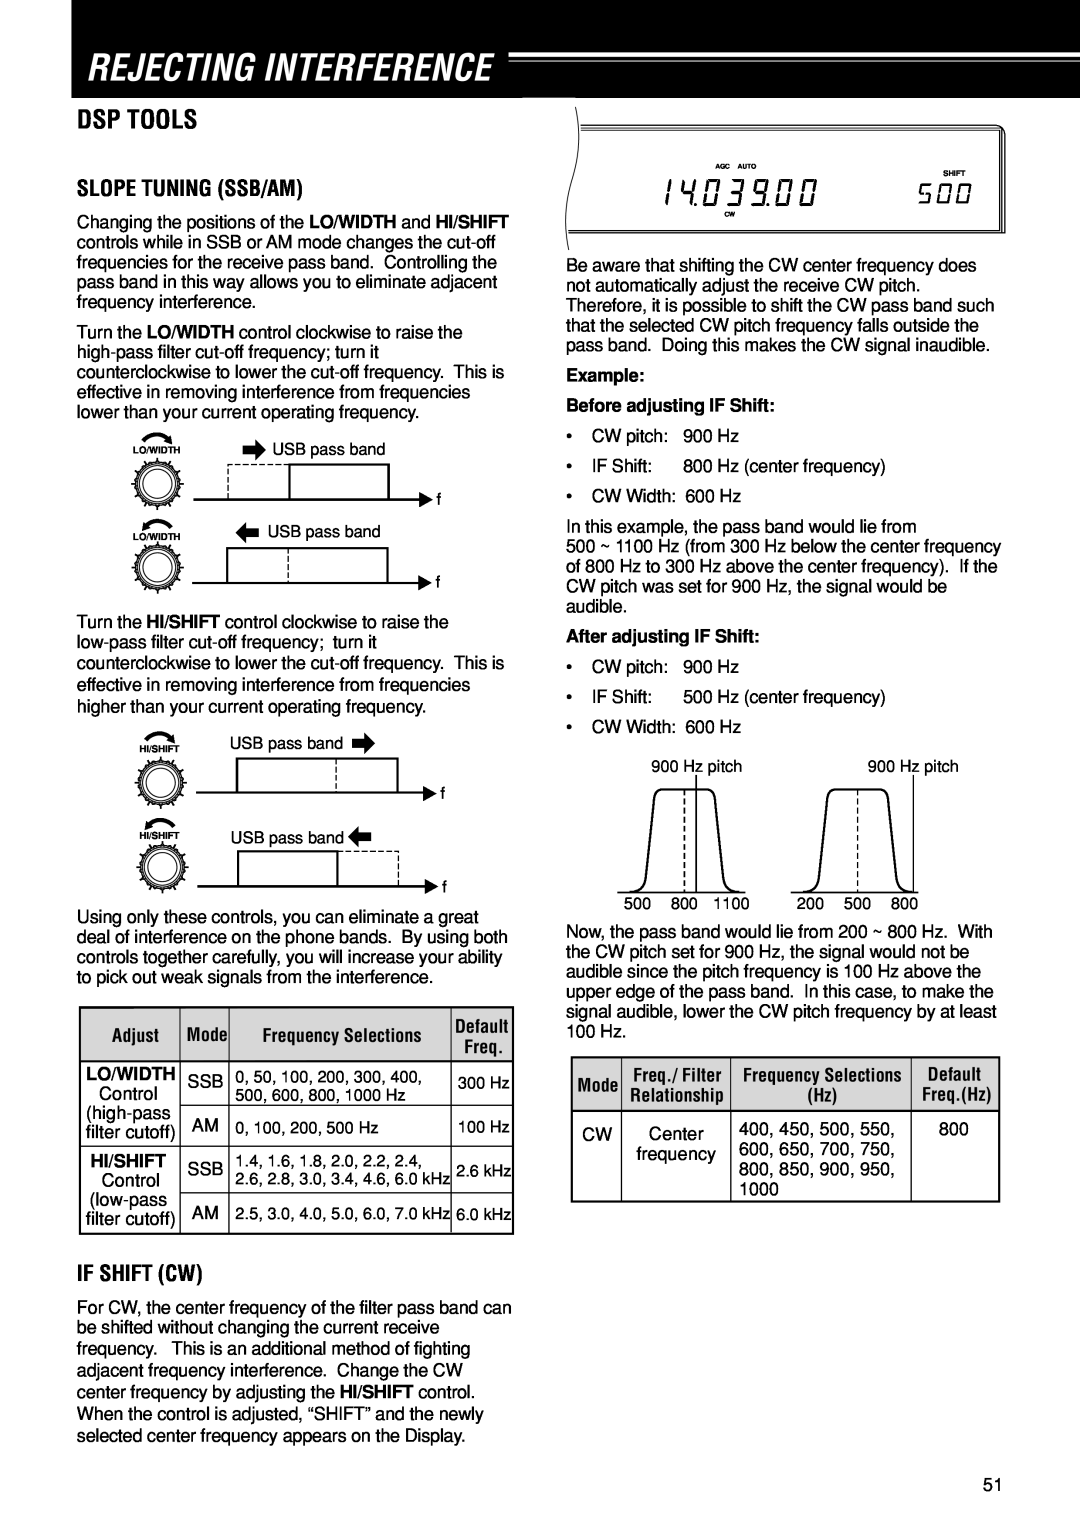 Kenwood TS-870S instruction manual Rejecting Interference, Dsp Tools, Slope Tuning Ssb/Am, If Shift Cw 